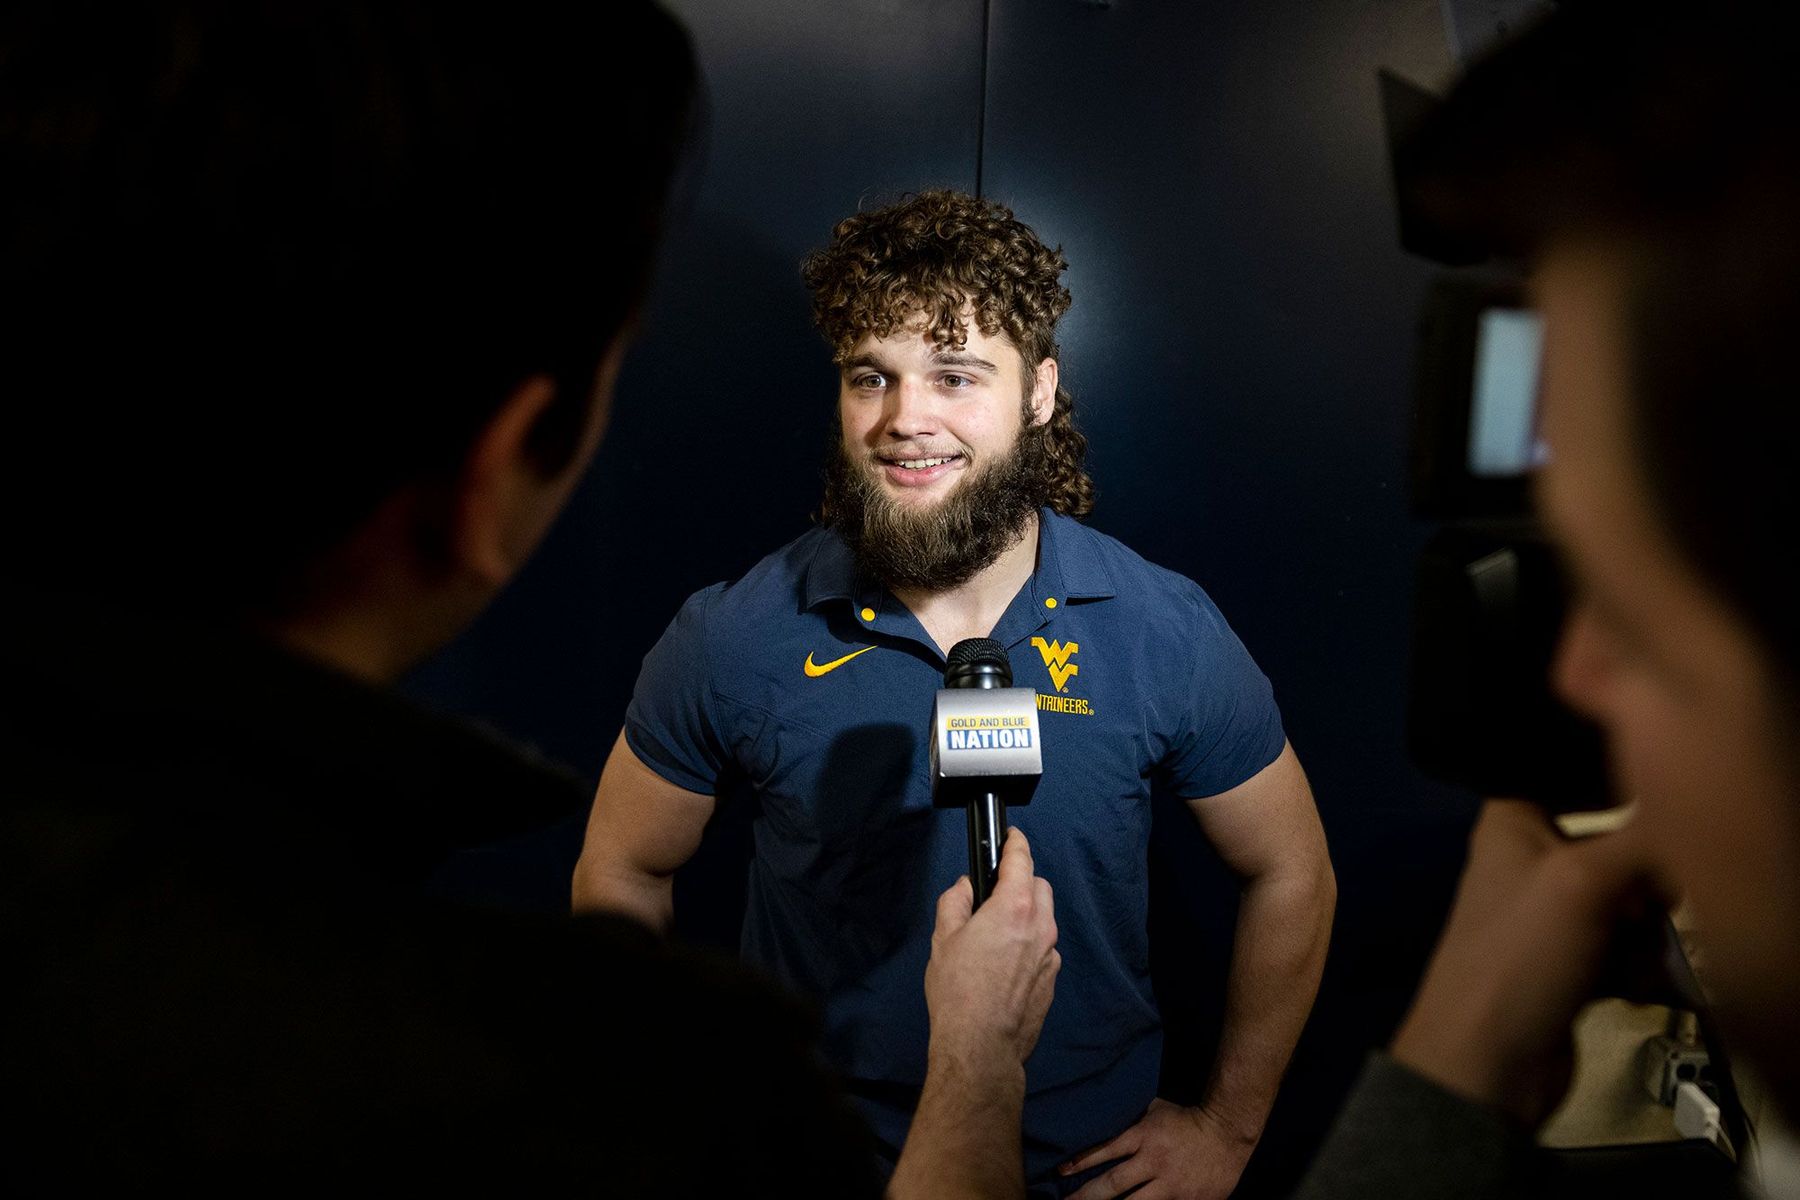 Mikel Hager being interviewed after becoming the Mountaineer mascot